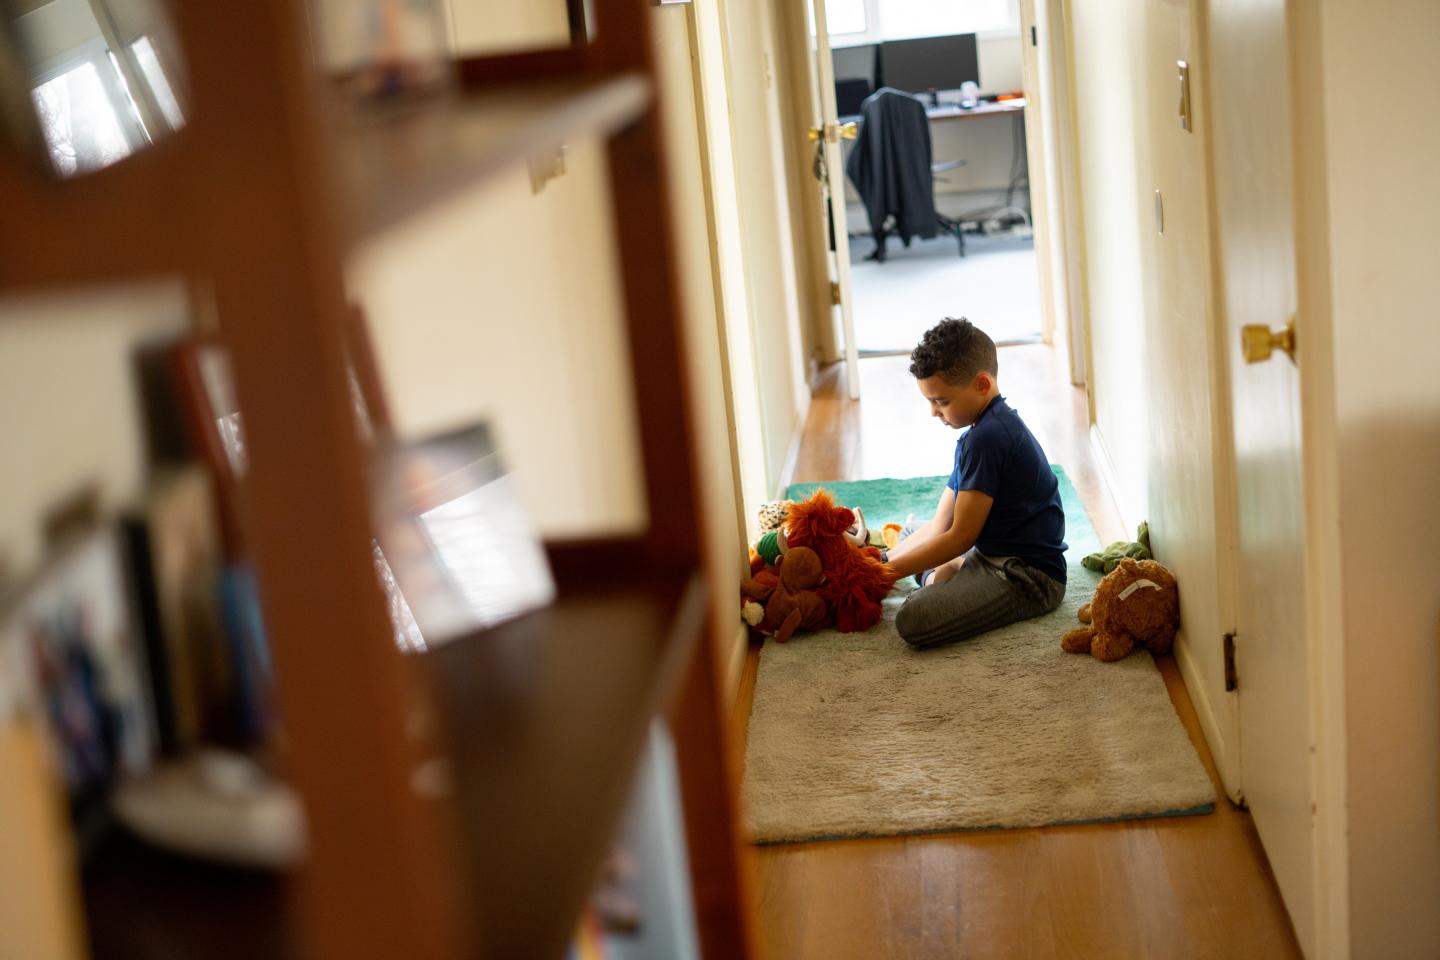 Coronavirus (COVID-19): Luka, 8, plays with stuffed animals in between completing school exercises on his first day of distance learning from home.